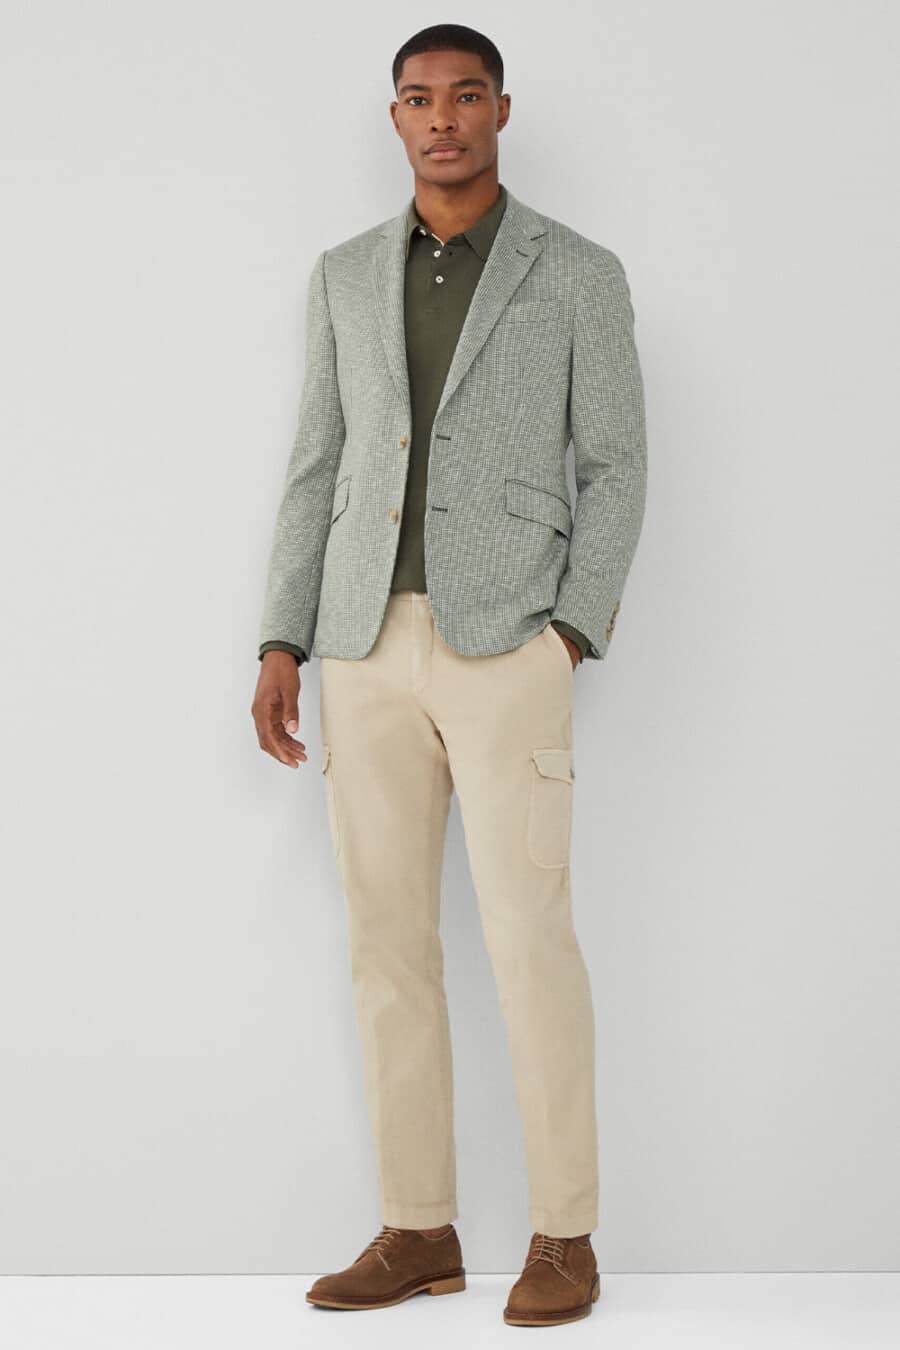 Men's khaki cargo pants, green polo shirt, green patterned blazer and brown suede Derby shoes outfit